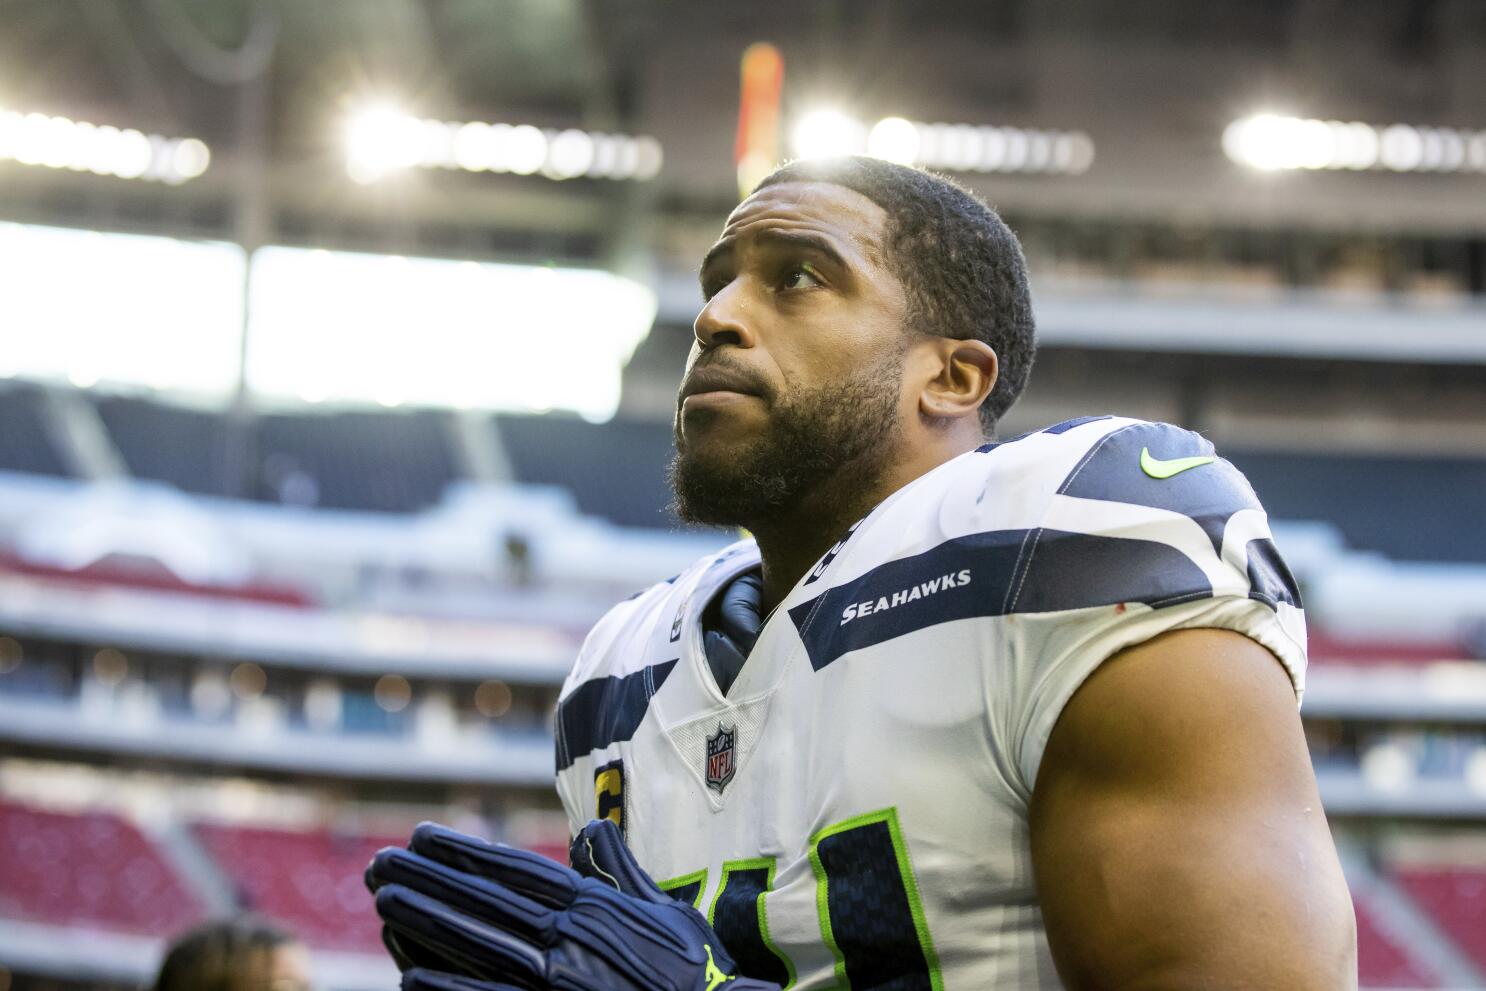 Seahawks will release star linebacker Bobby Wagner, according to reports